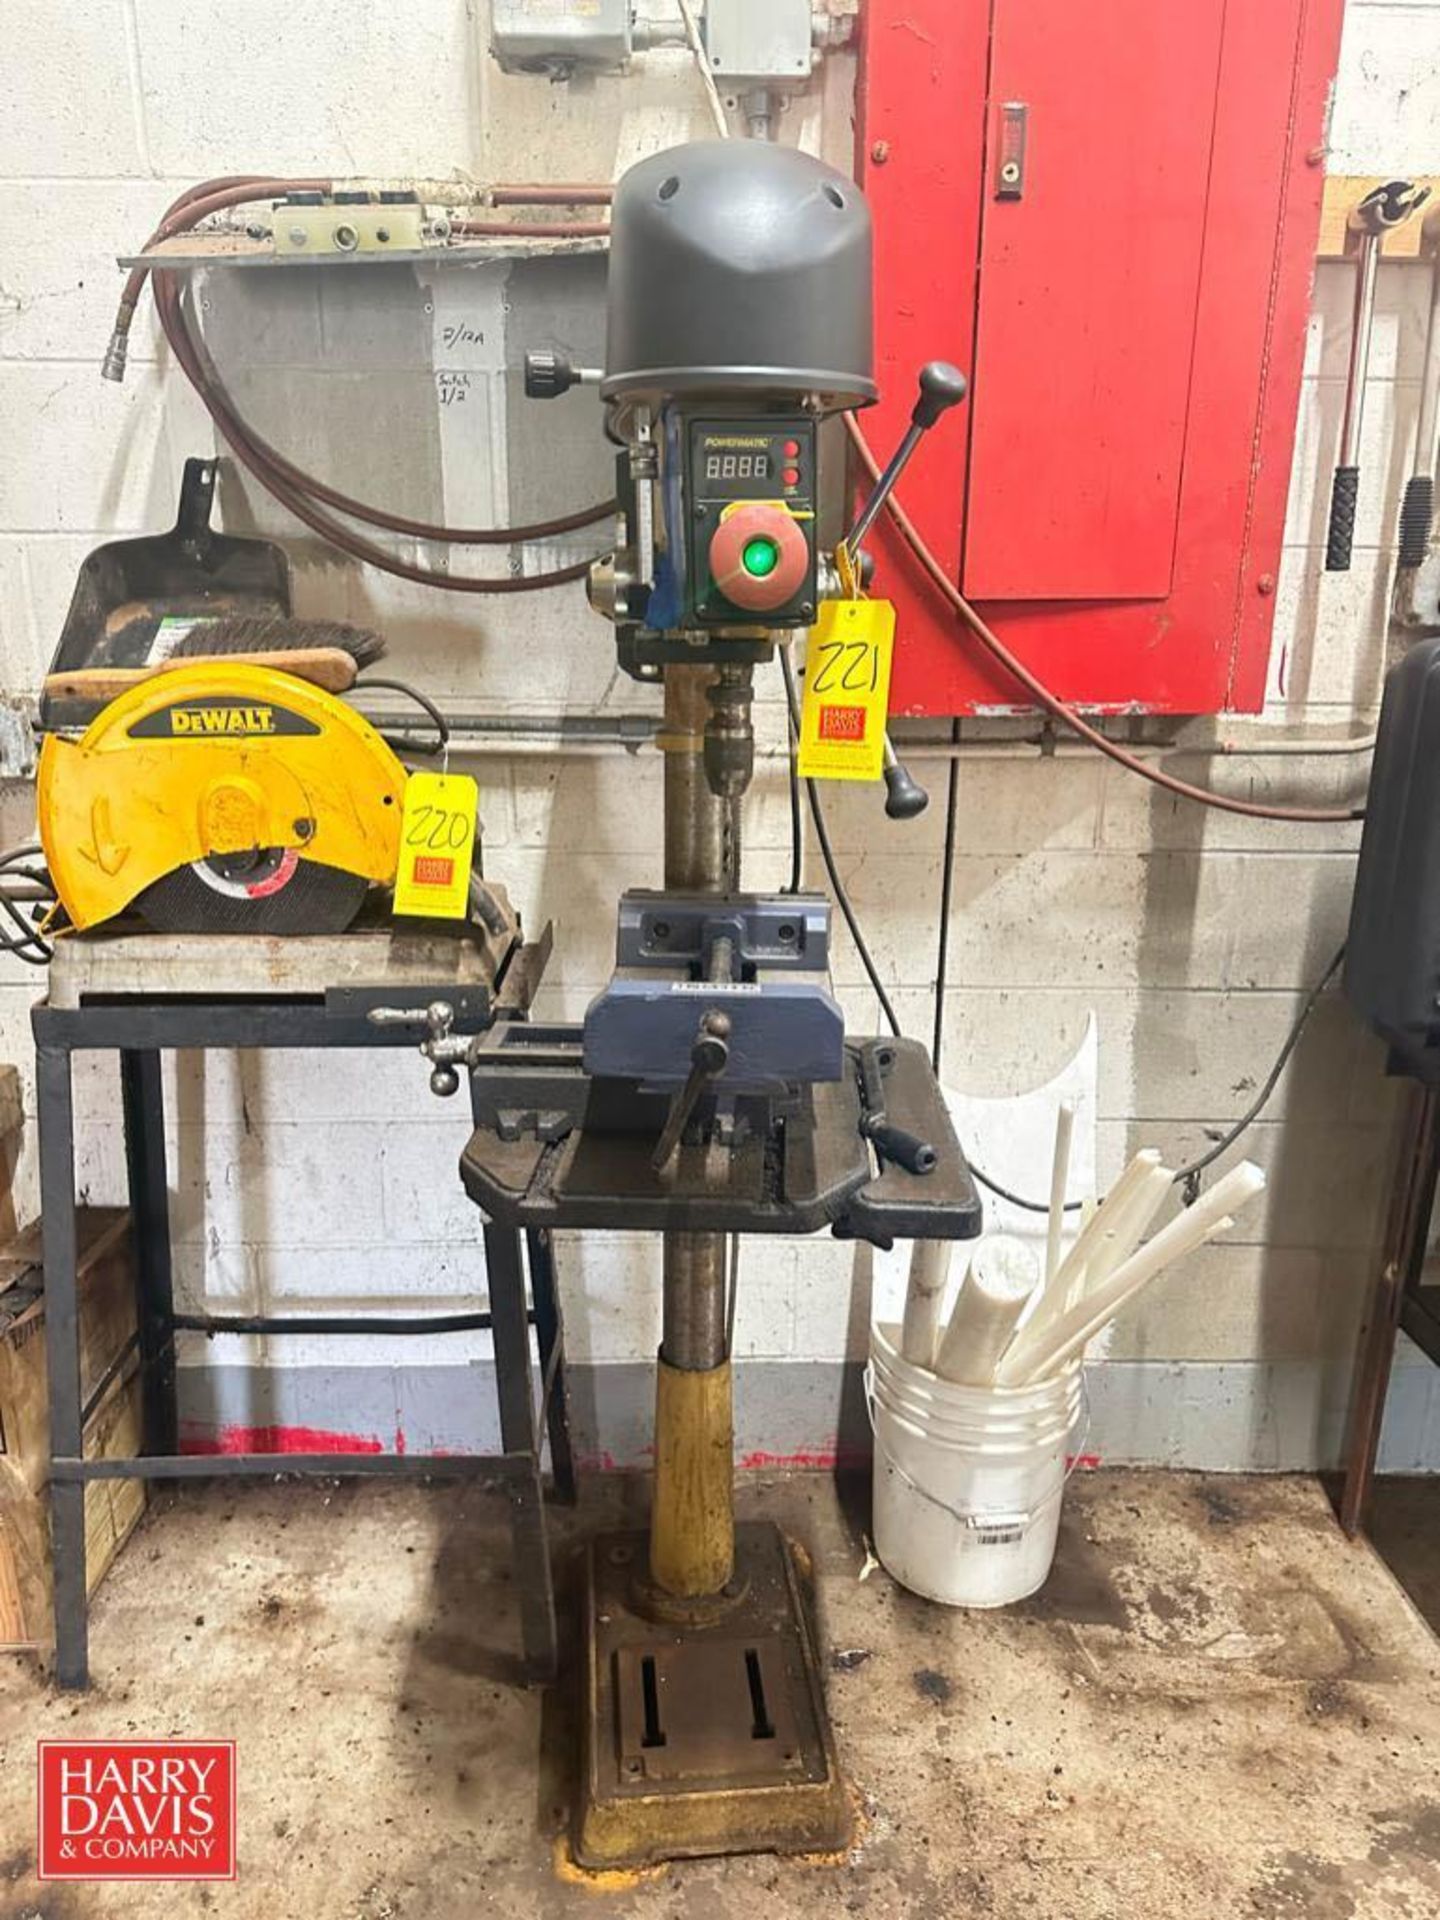 Powermatic 18” V.S. Drill Press, Model: 2800 with Palmgren Vise